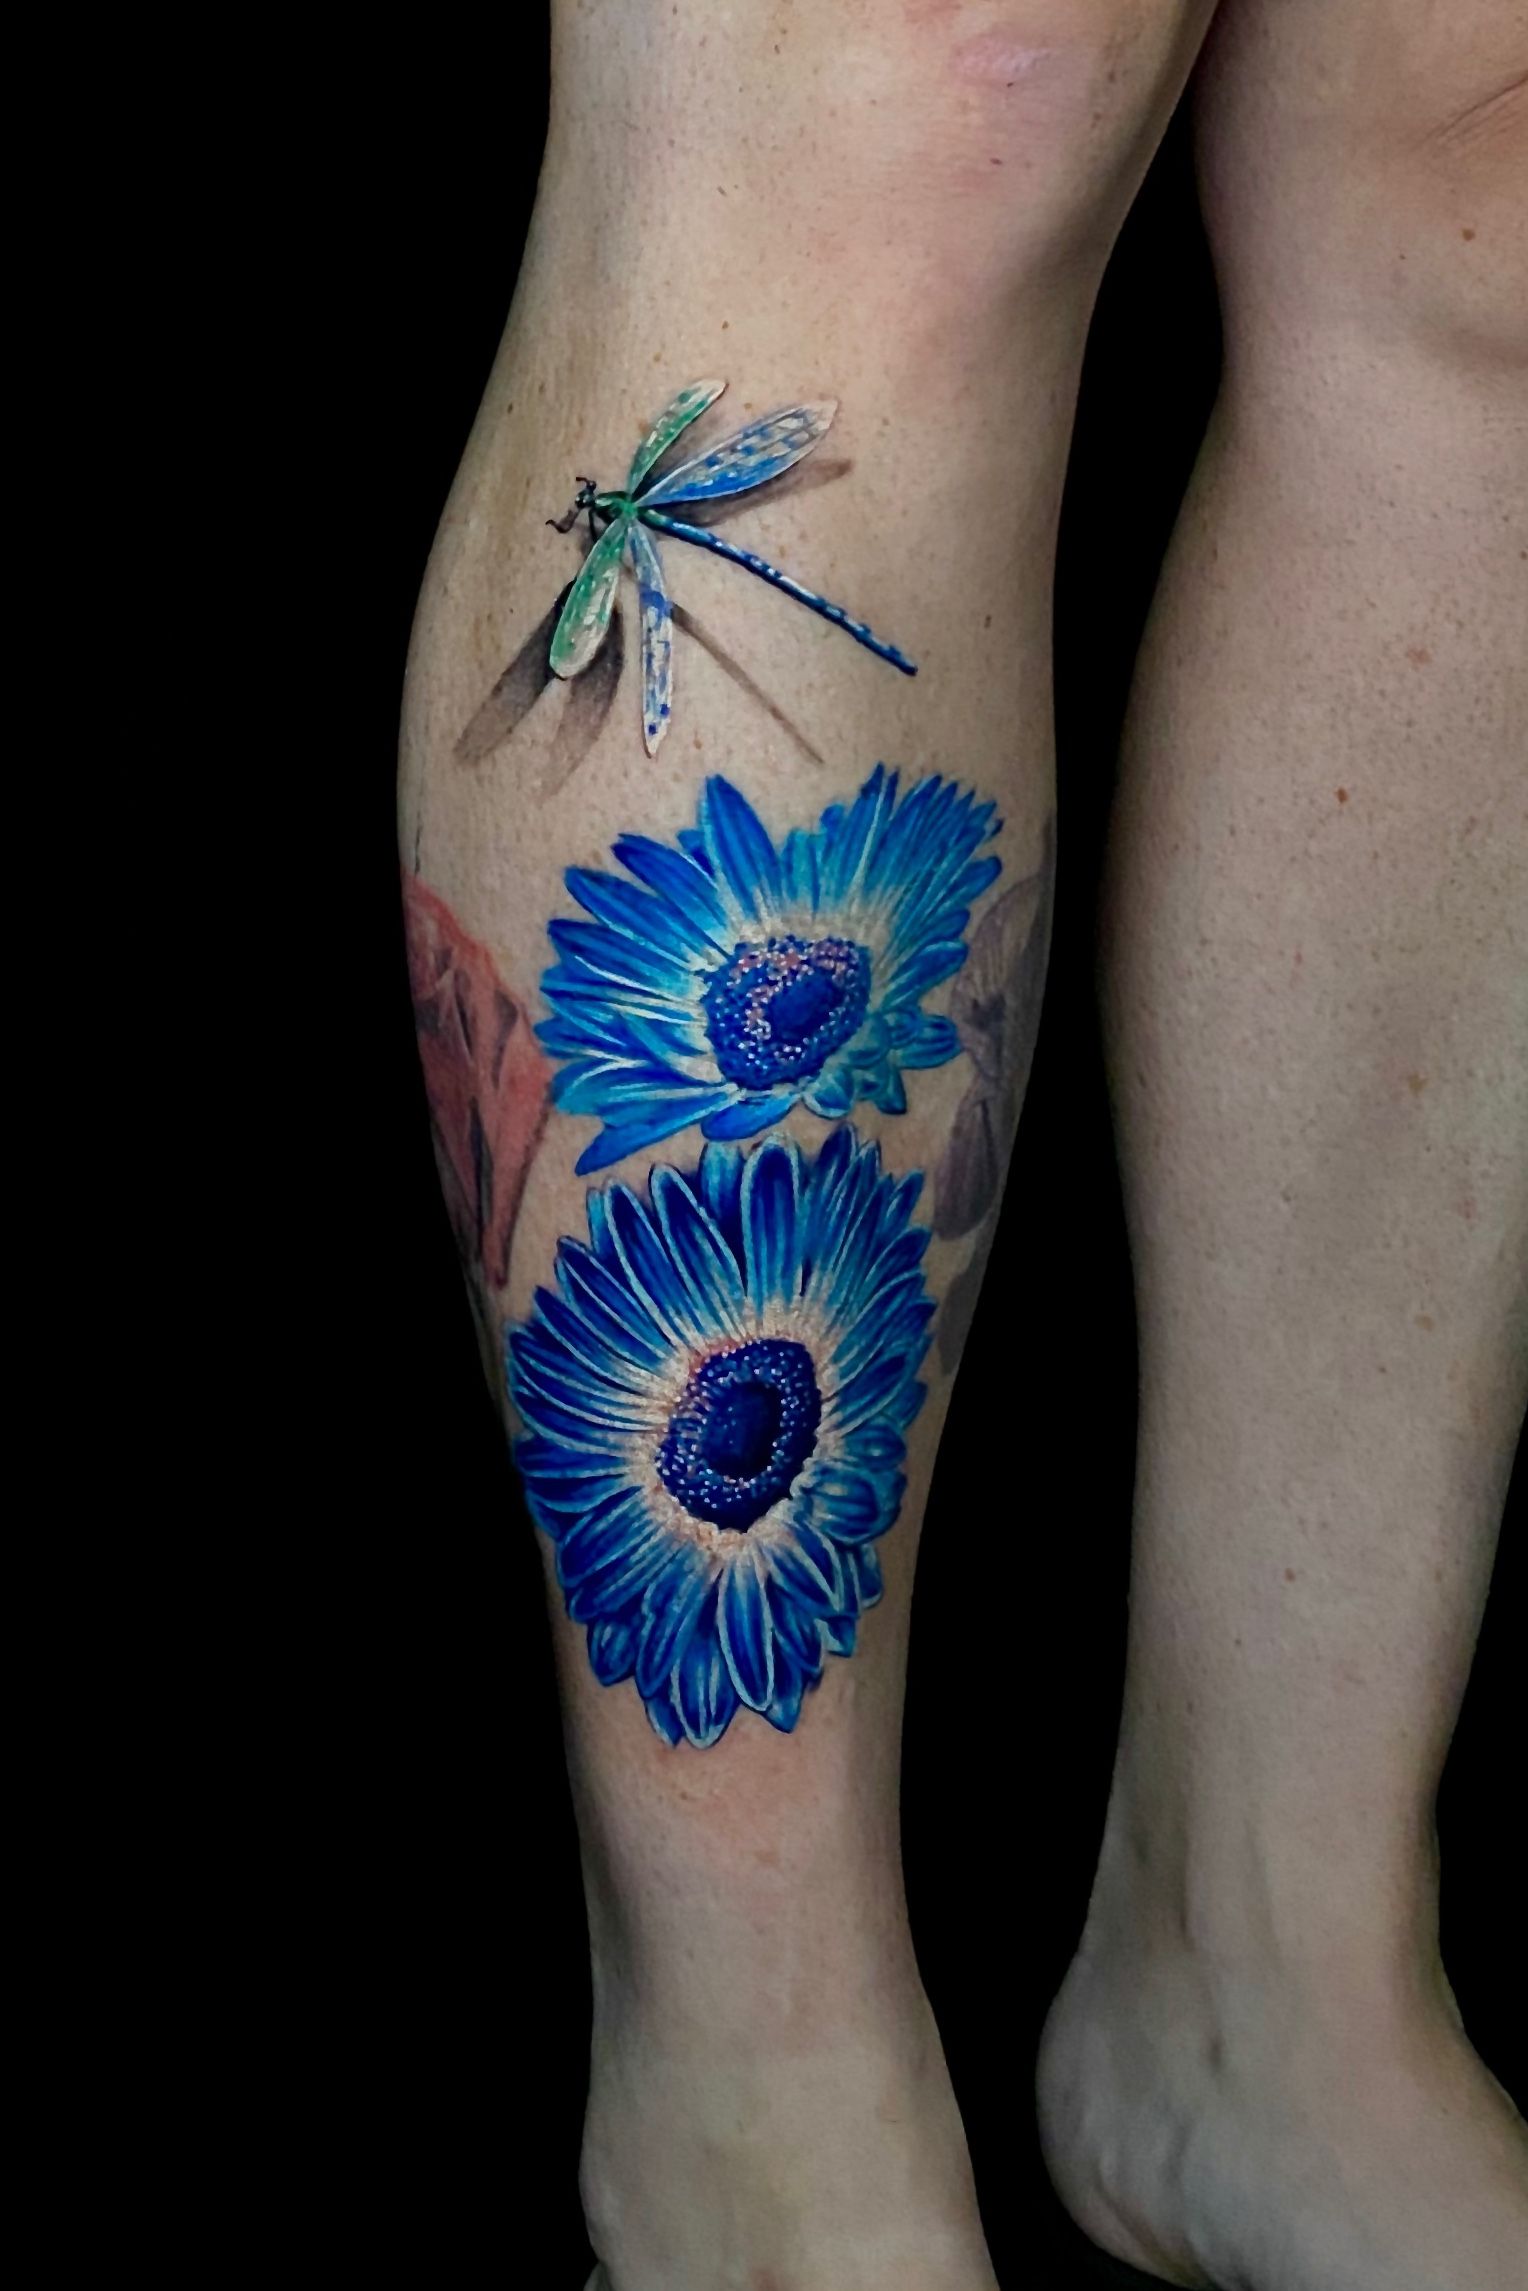 Raven Tattoo - Added the blue cosmo flowers tonight to... | Facebook